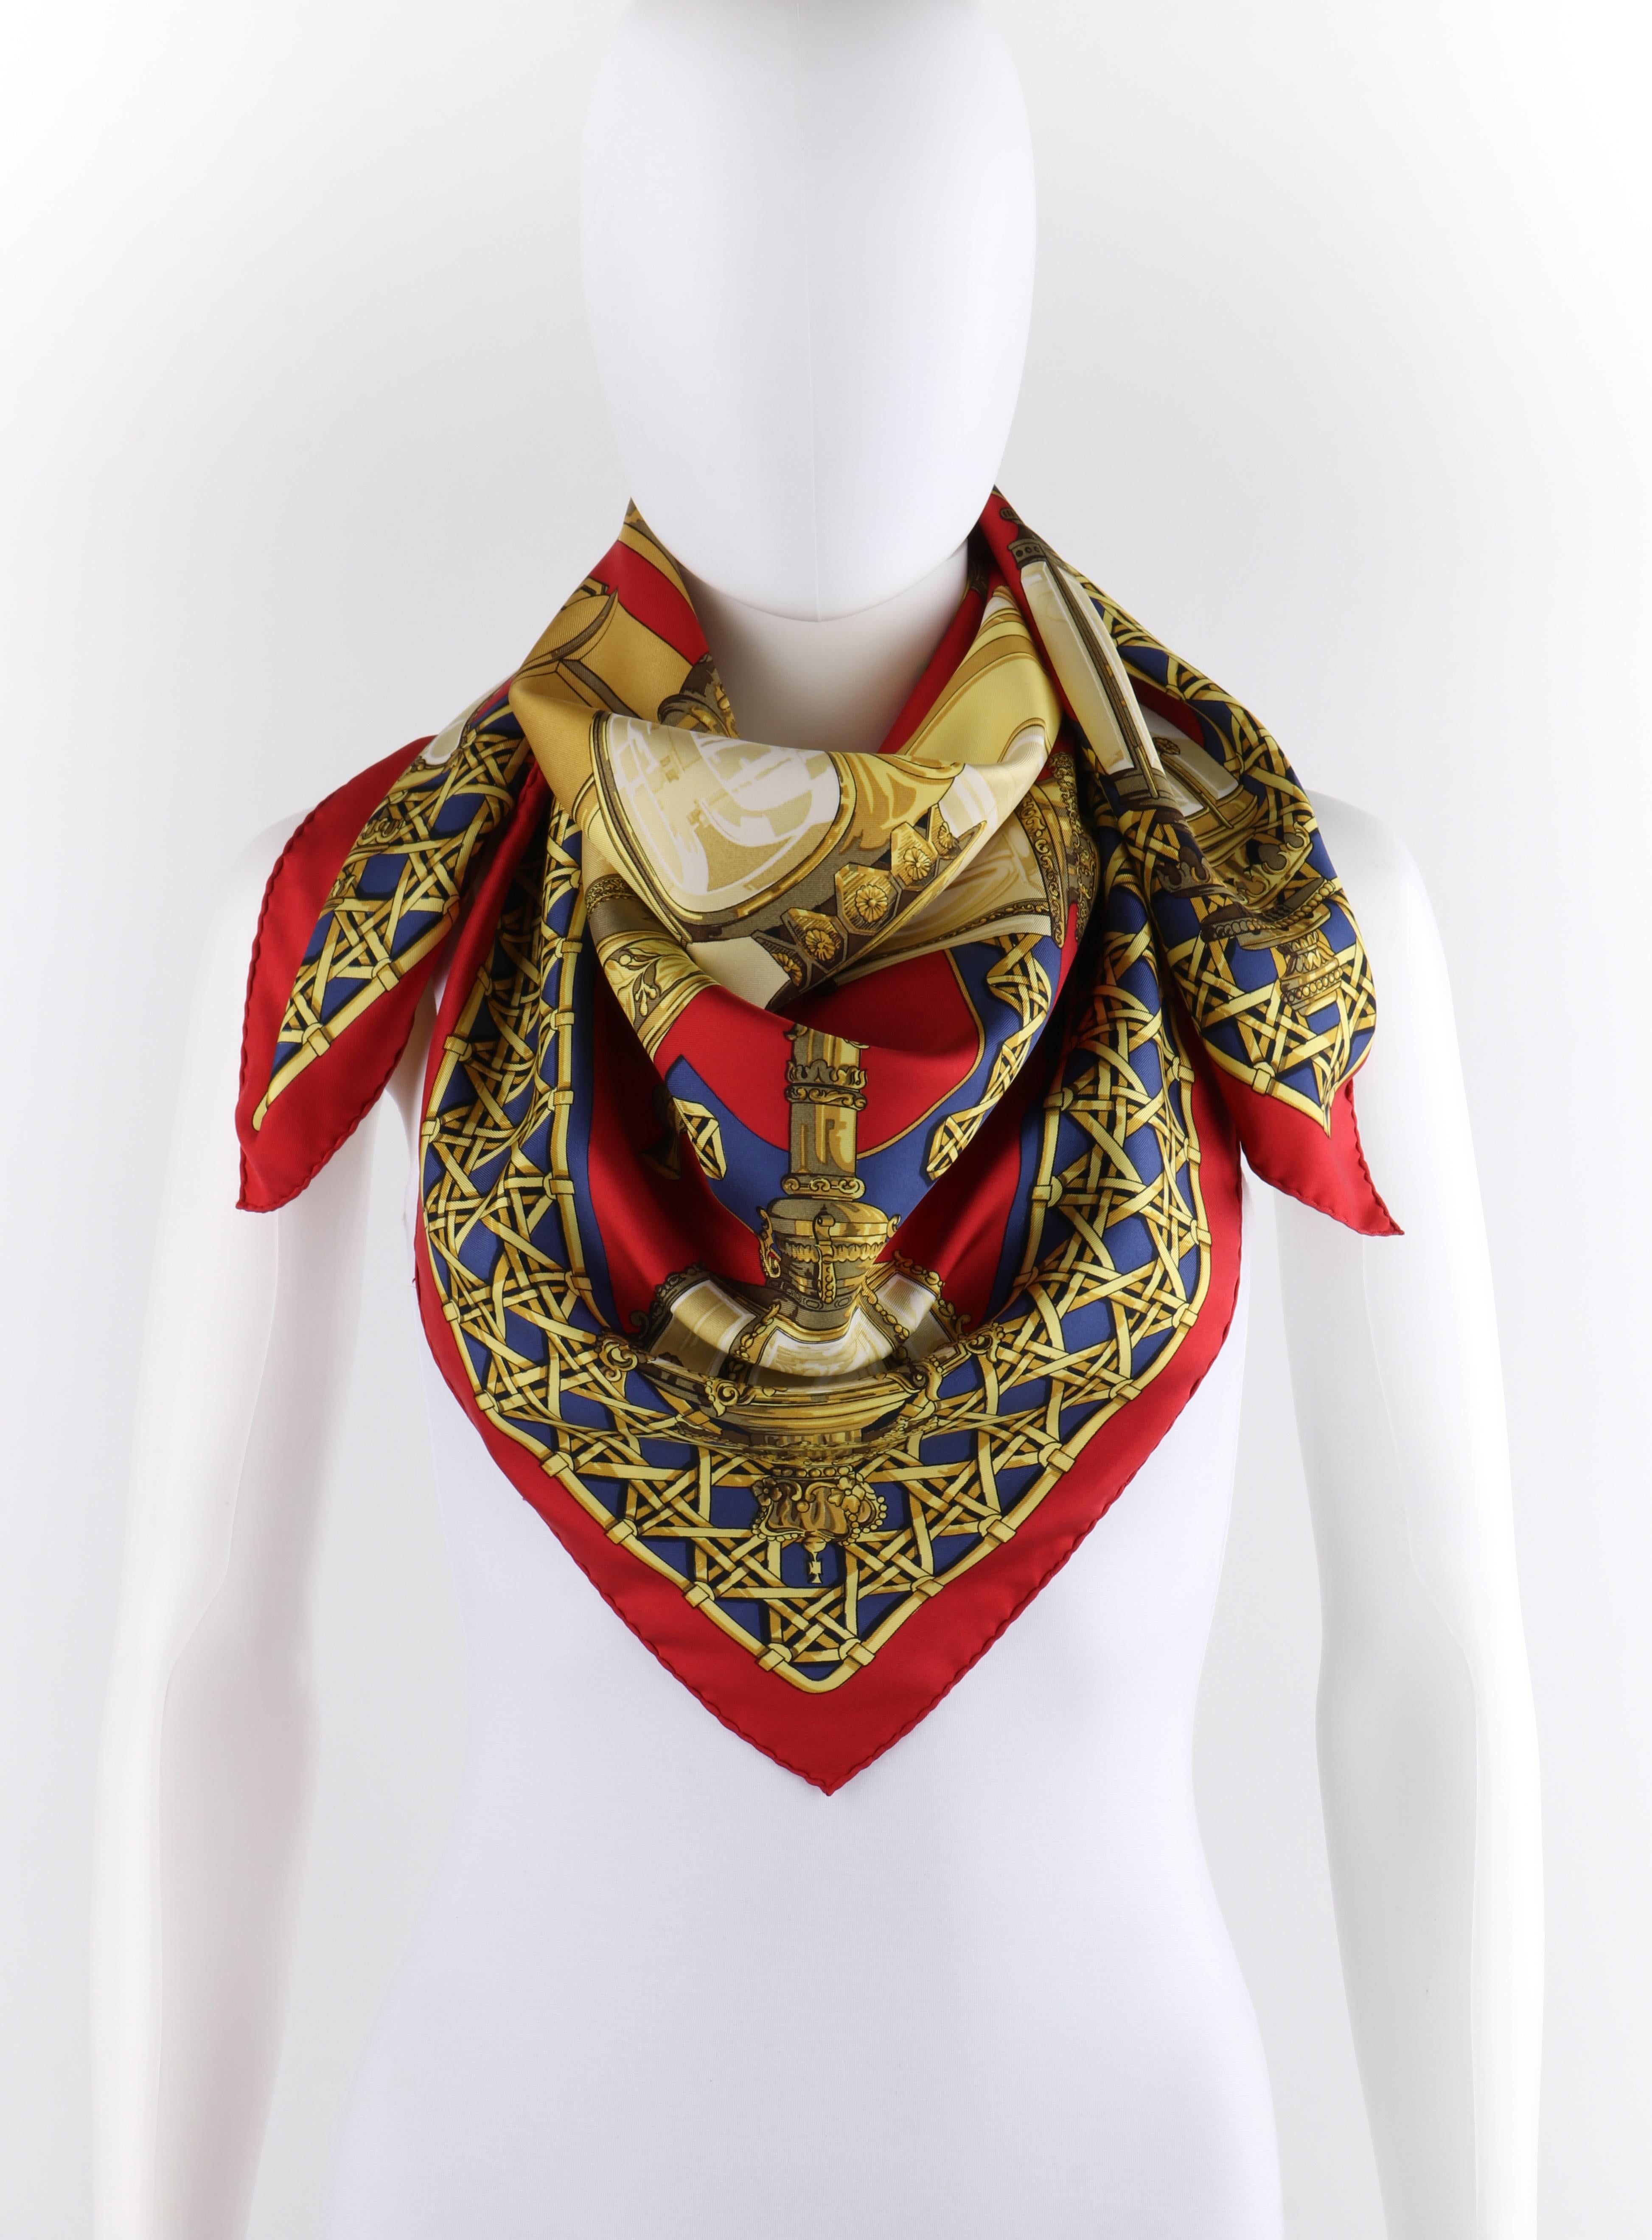 HERMES c.1971 Caty Latham “Feux De Route” Red Gold Blue Lantern Print Silk Scarf
 
Brand/Manufacturer: Hermes
Circa: 1971
Designer: Caty Latham 
Style: Silk scarf
Color(s): Shades of red, blue, yellow, brown, gold, white and black
Lined: No
Marked